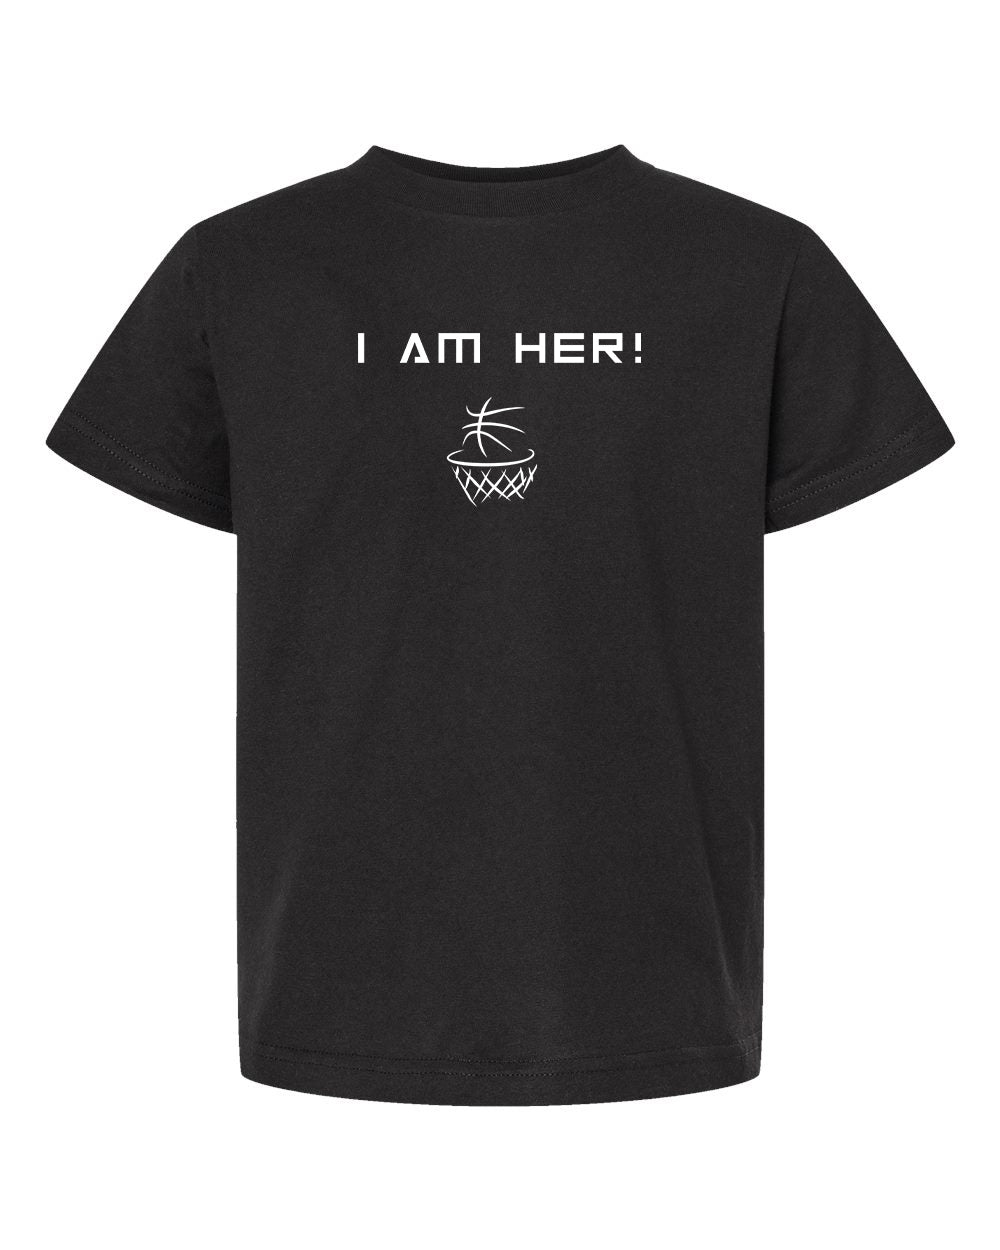 Disal Custom Youth Tee "I Am Her!" - 235 (color options available)